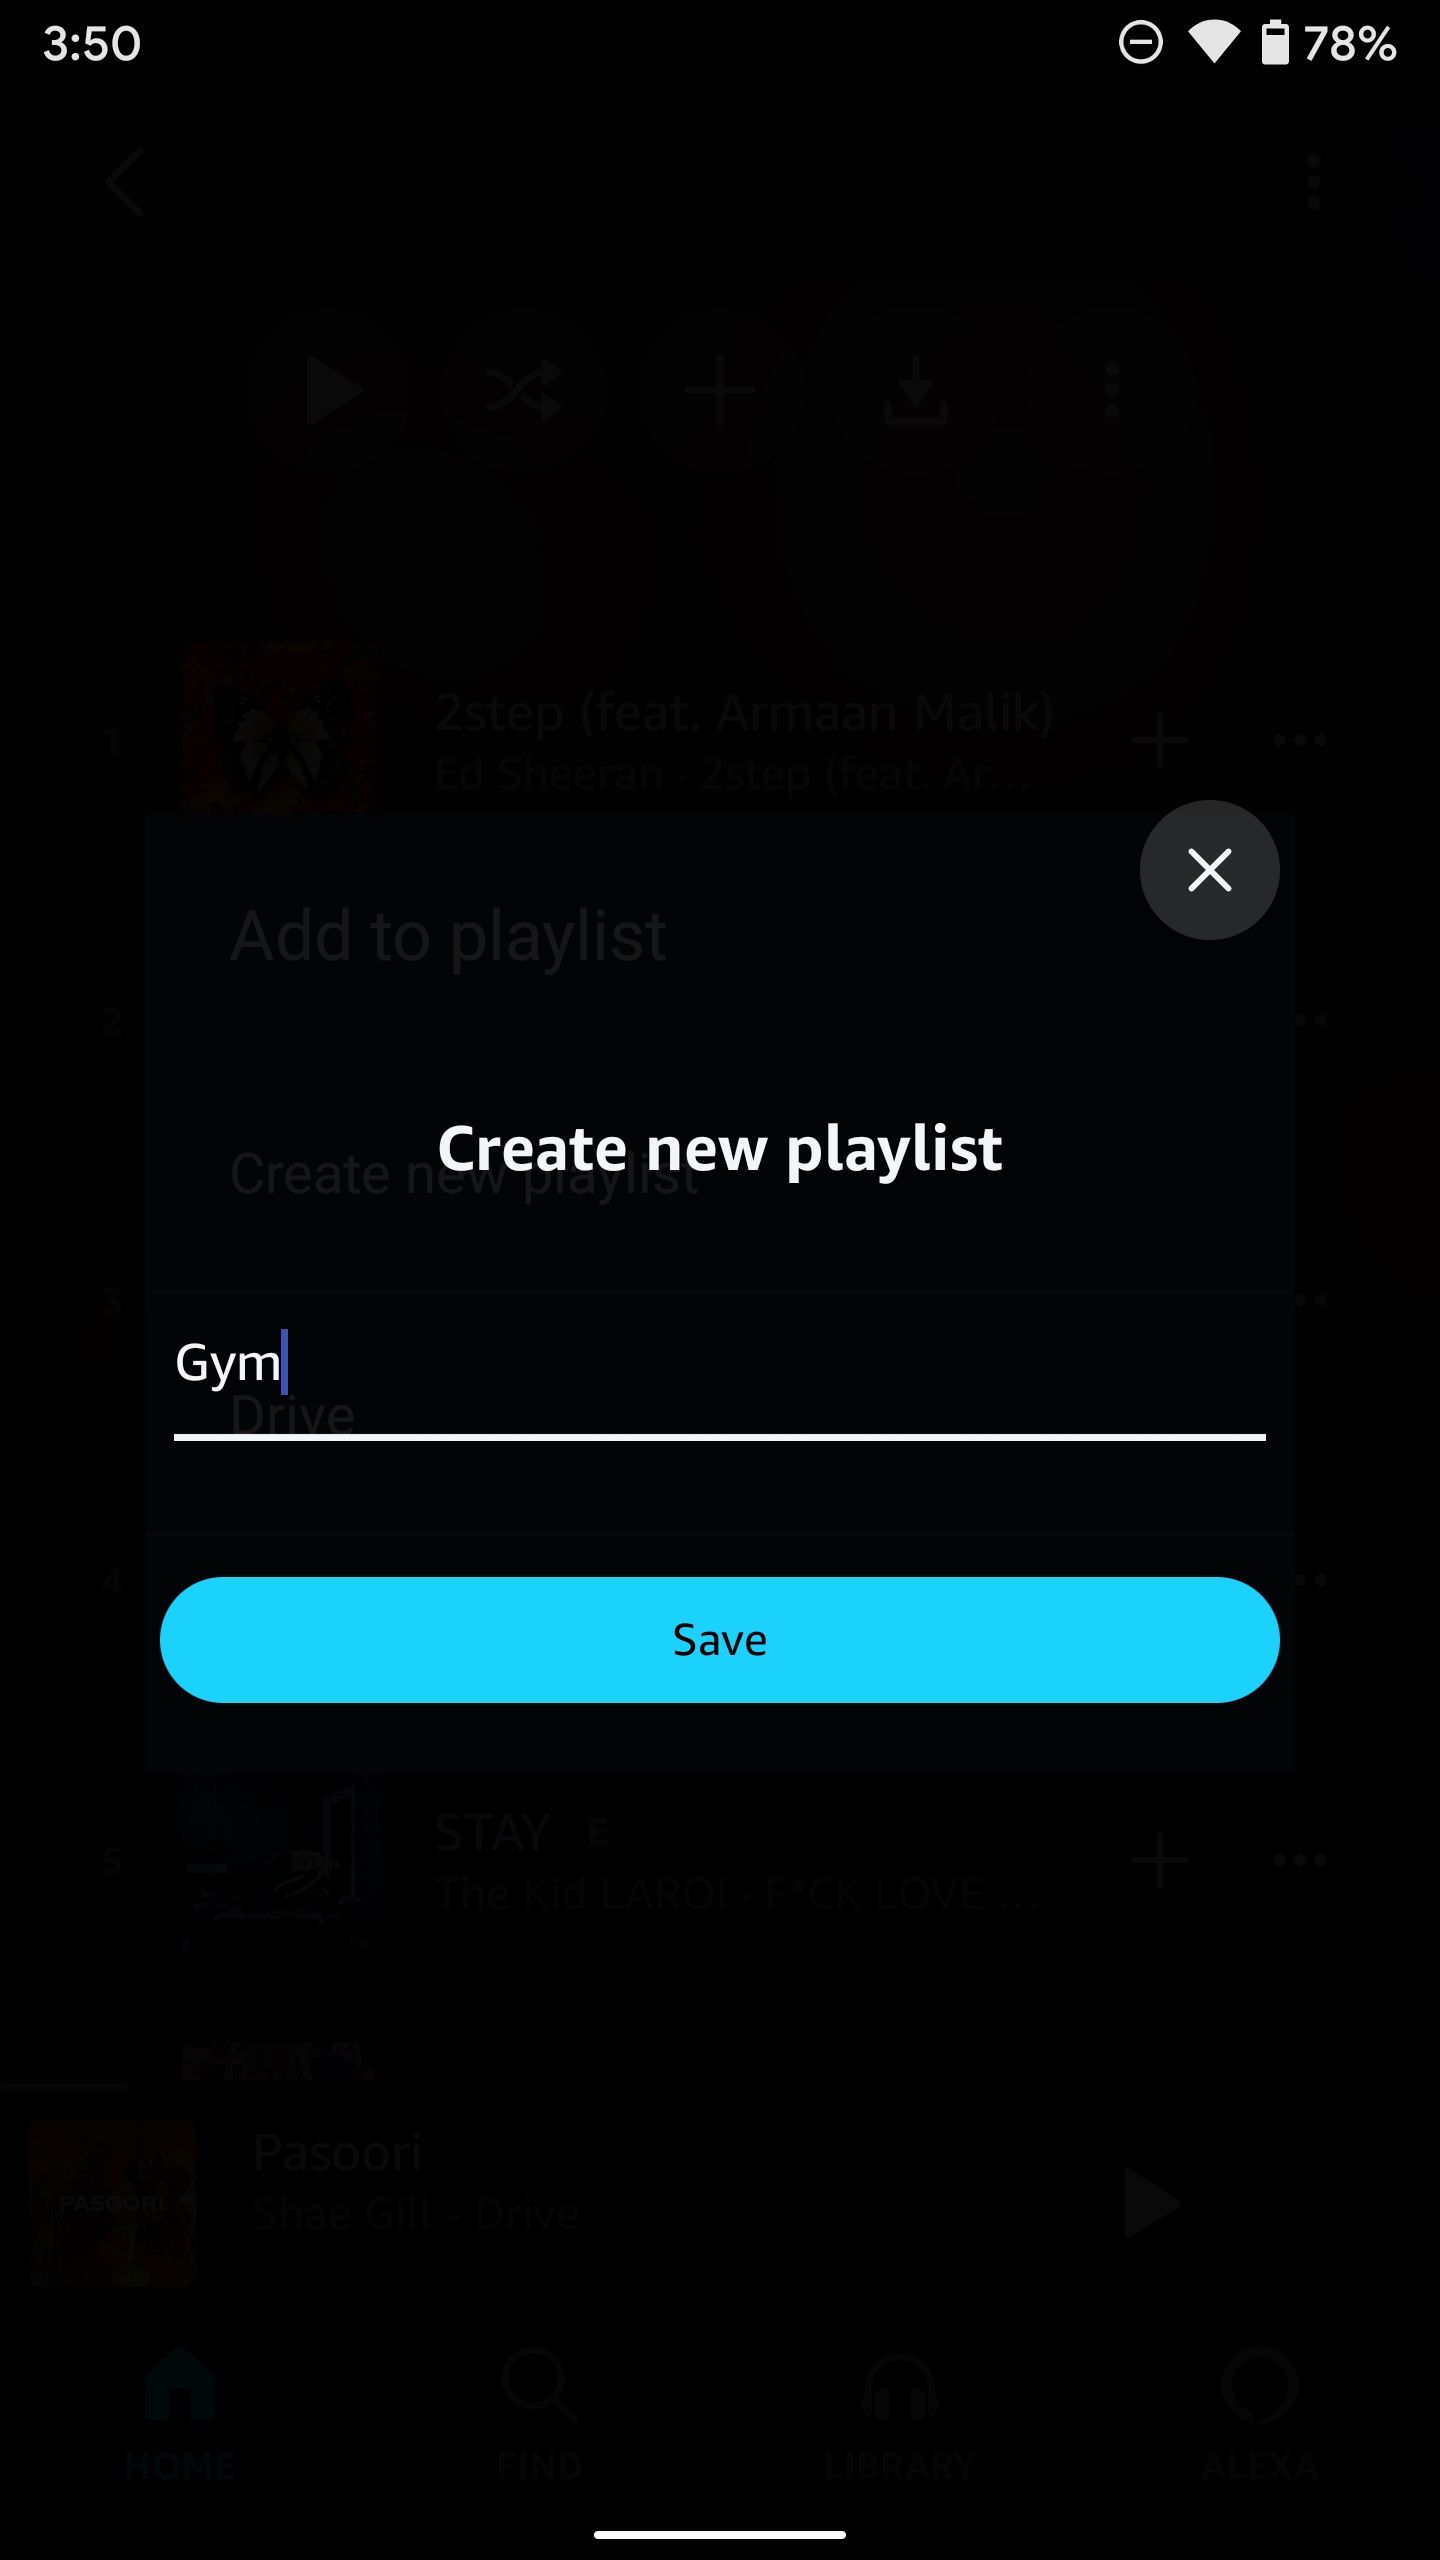 Create a new playlist screen in the Amazon Music app with an option to name the playlist and a 'Save' button.